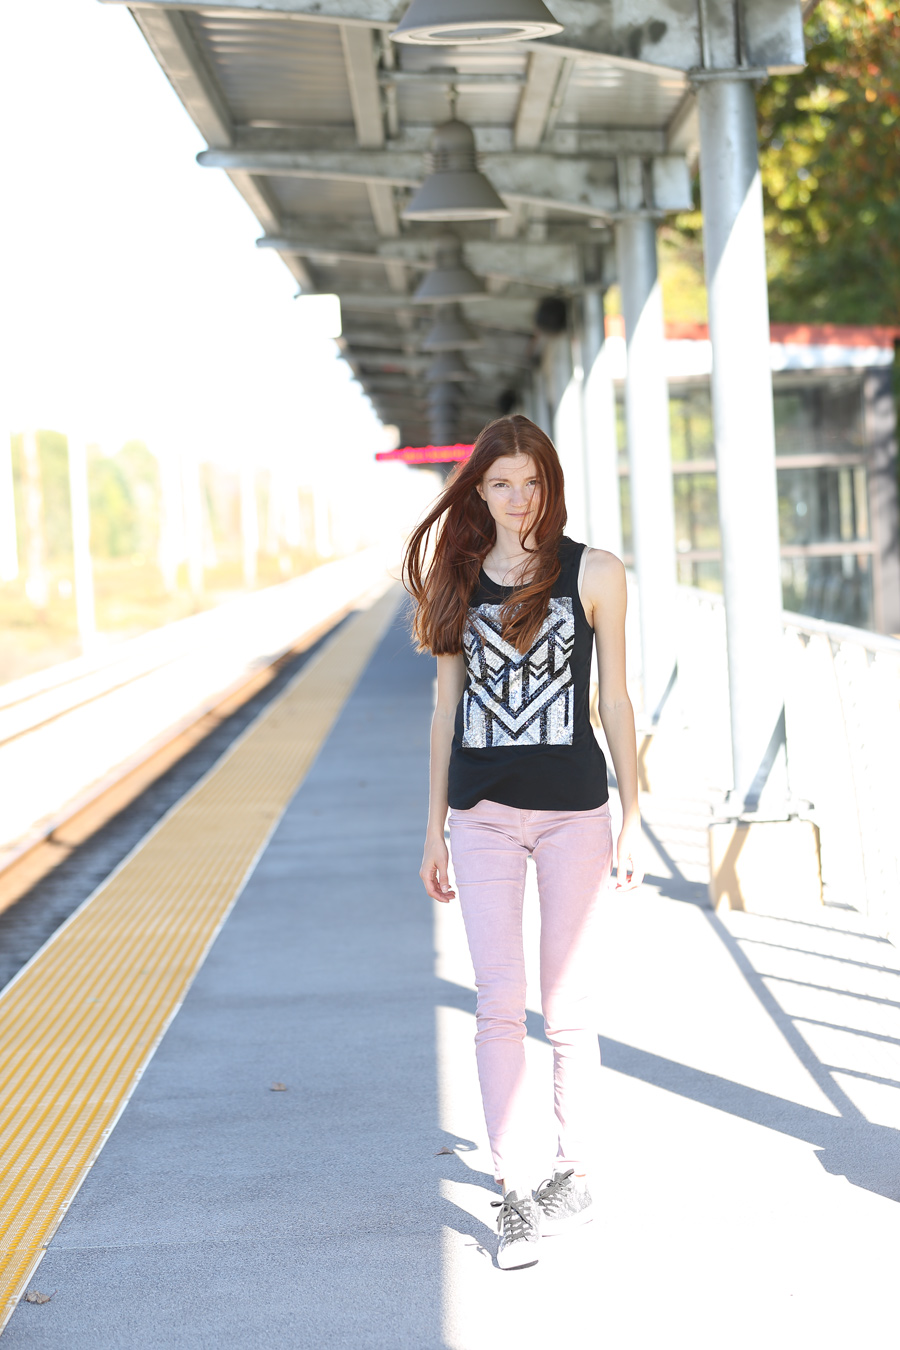 nataliesoul-train-station-outfit-title